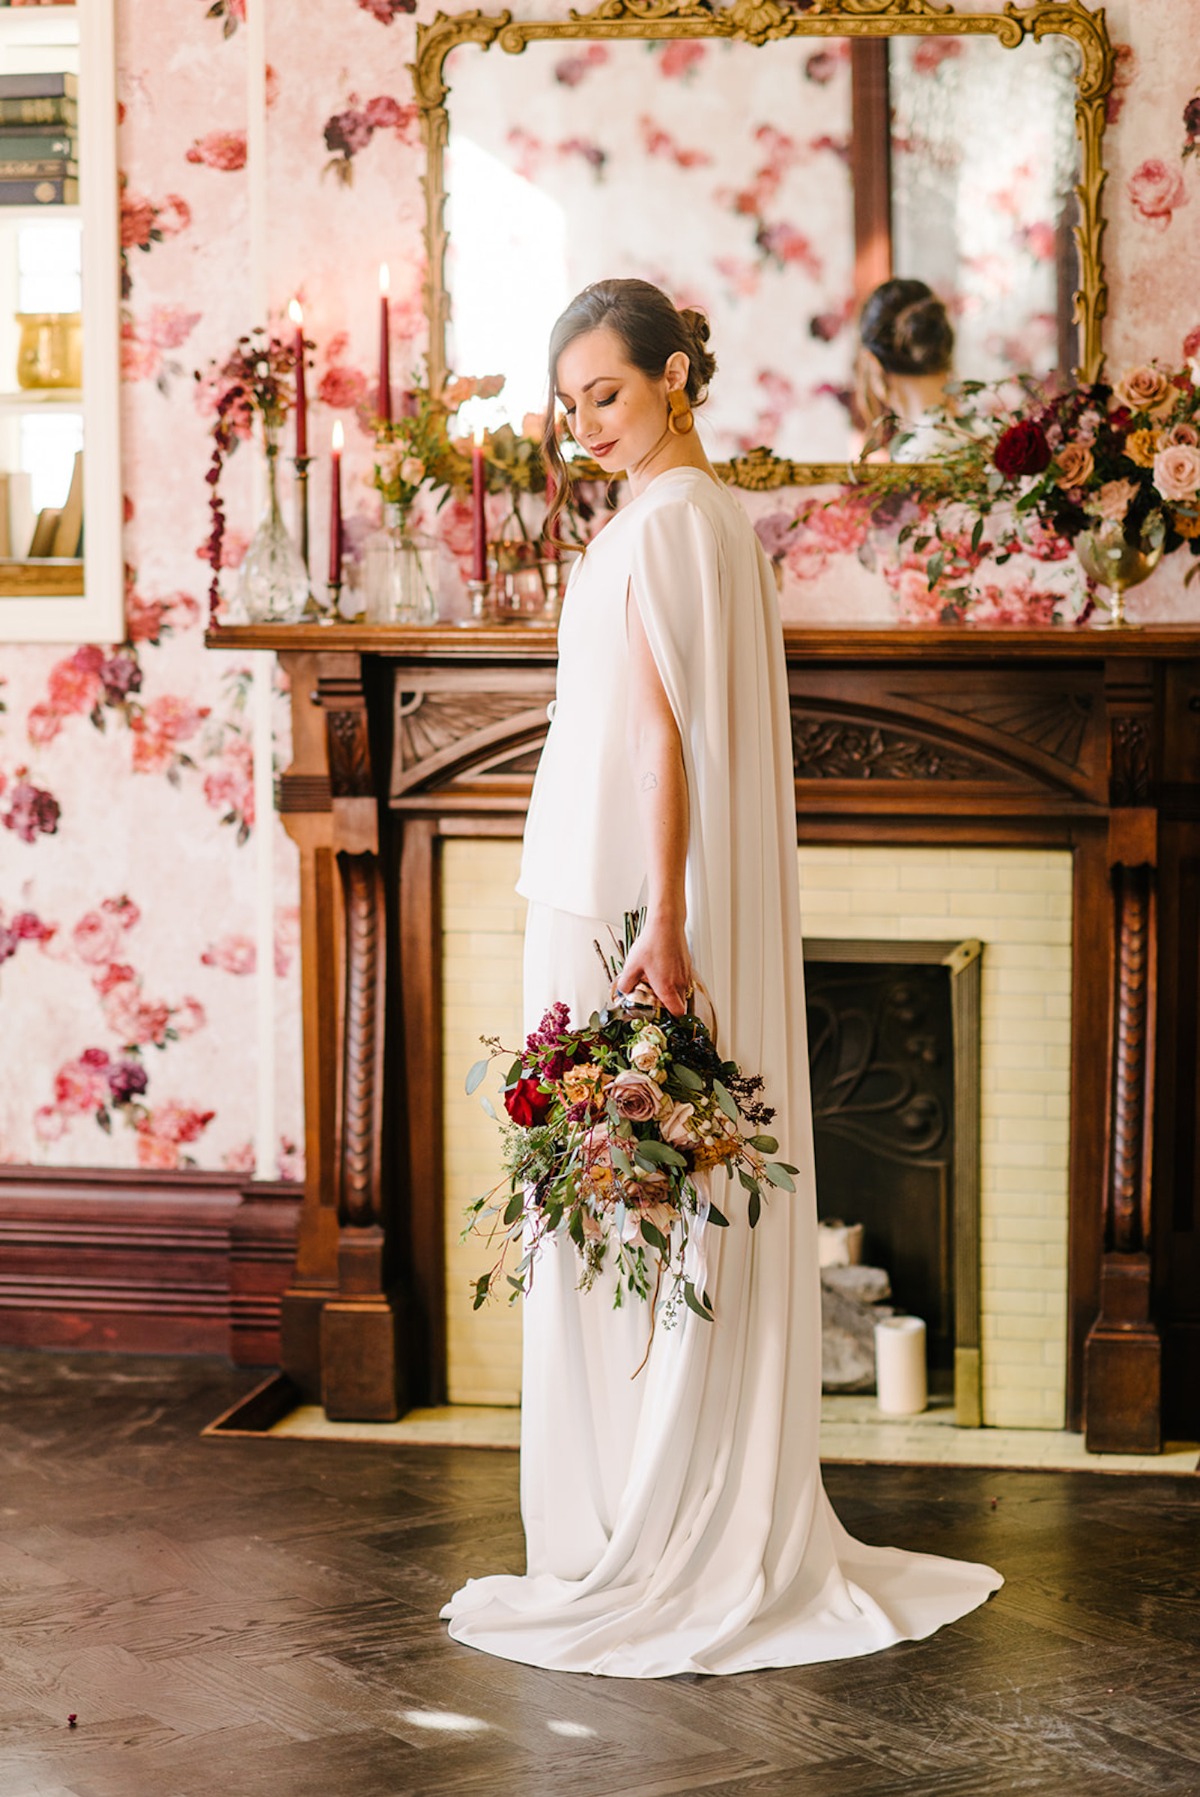 A Wedding Inspo Shoot That's Perfectly Tailored For A #BossBride